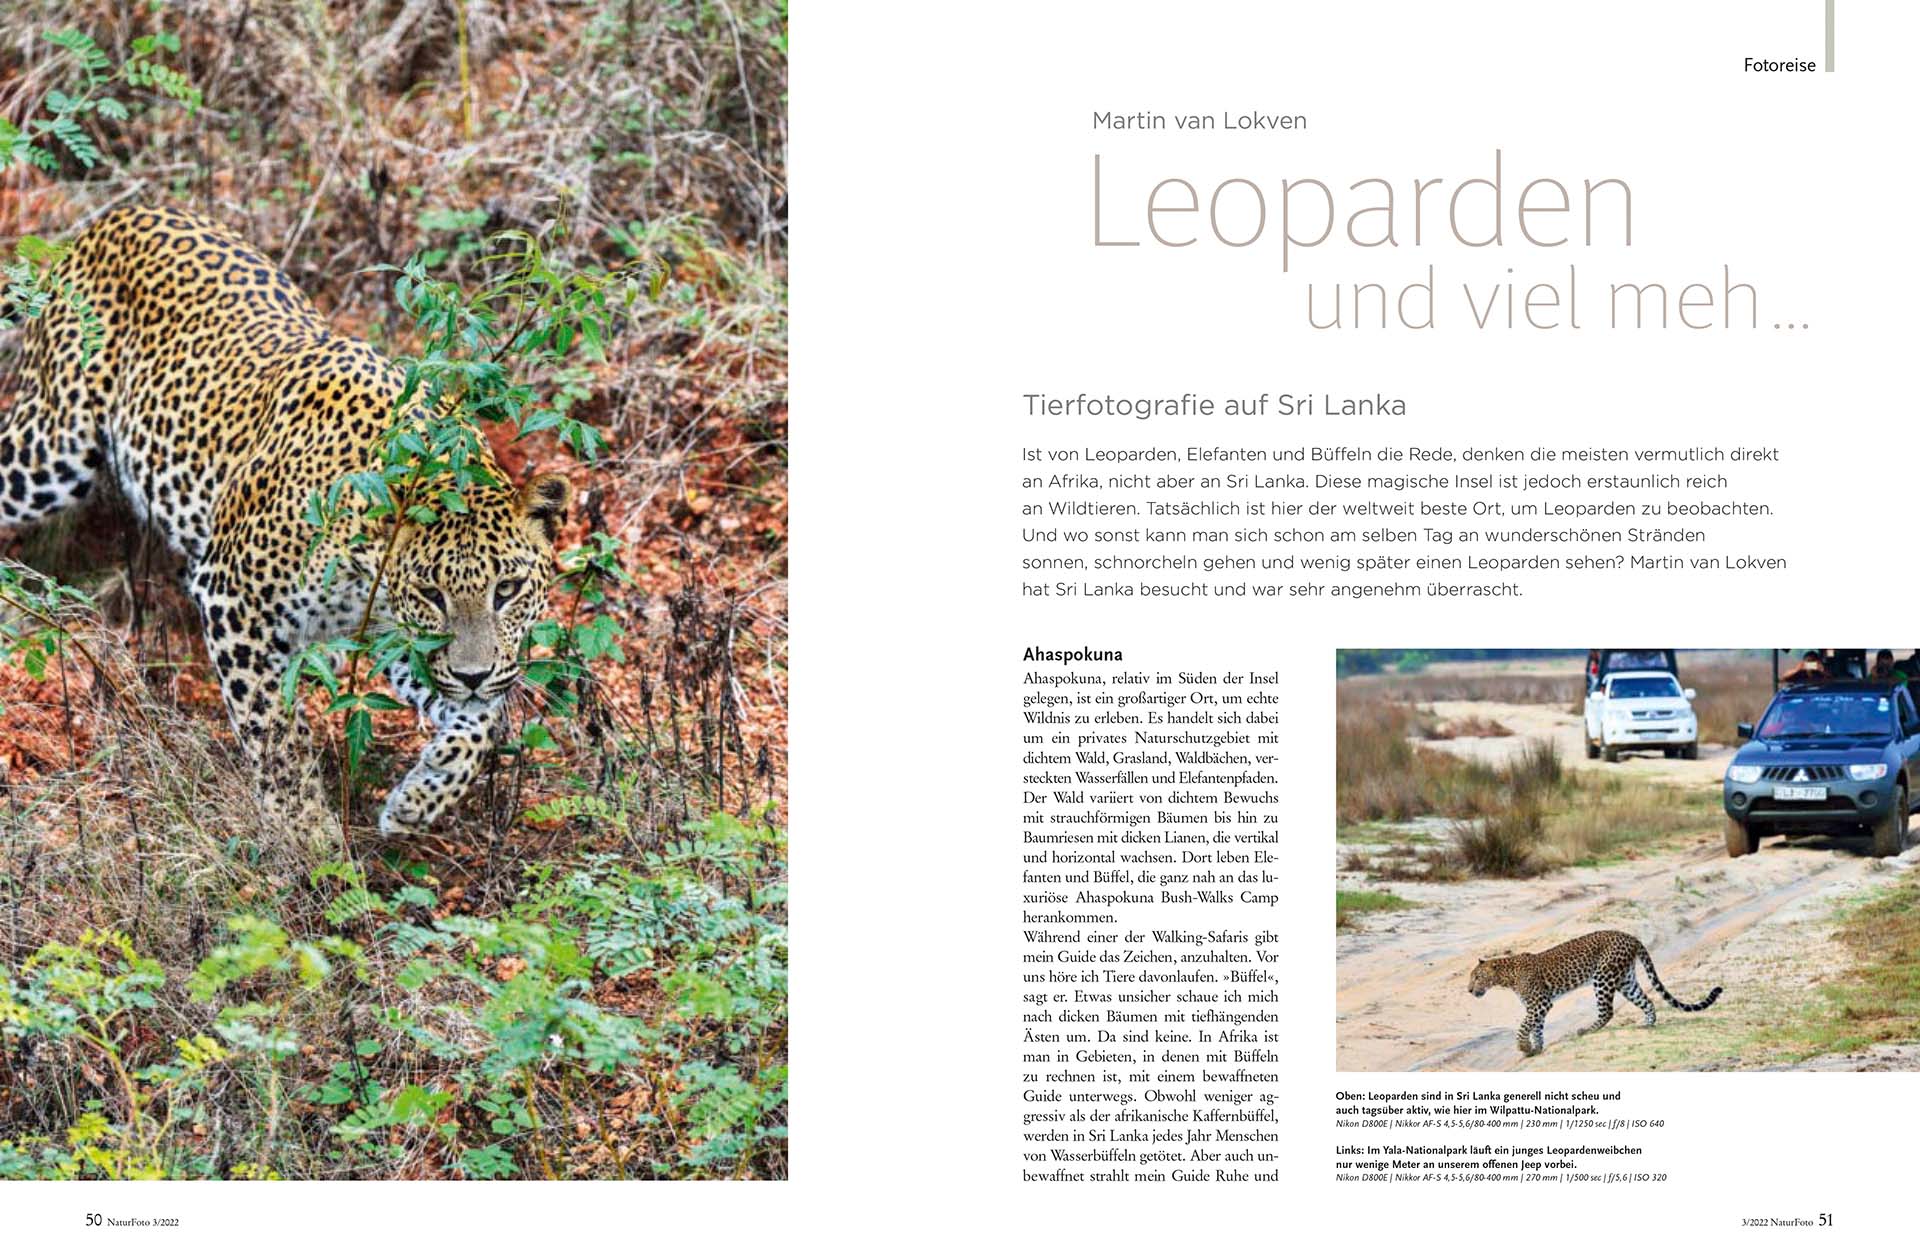 Eight pages of article about wildlife of Sri Lanka in the German magazine NaturFoto.